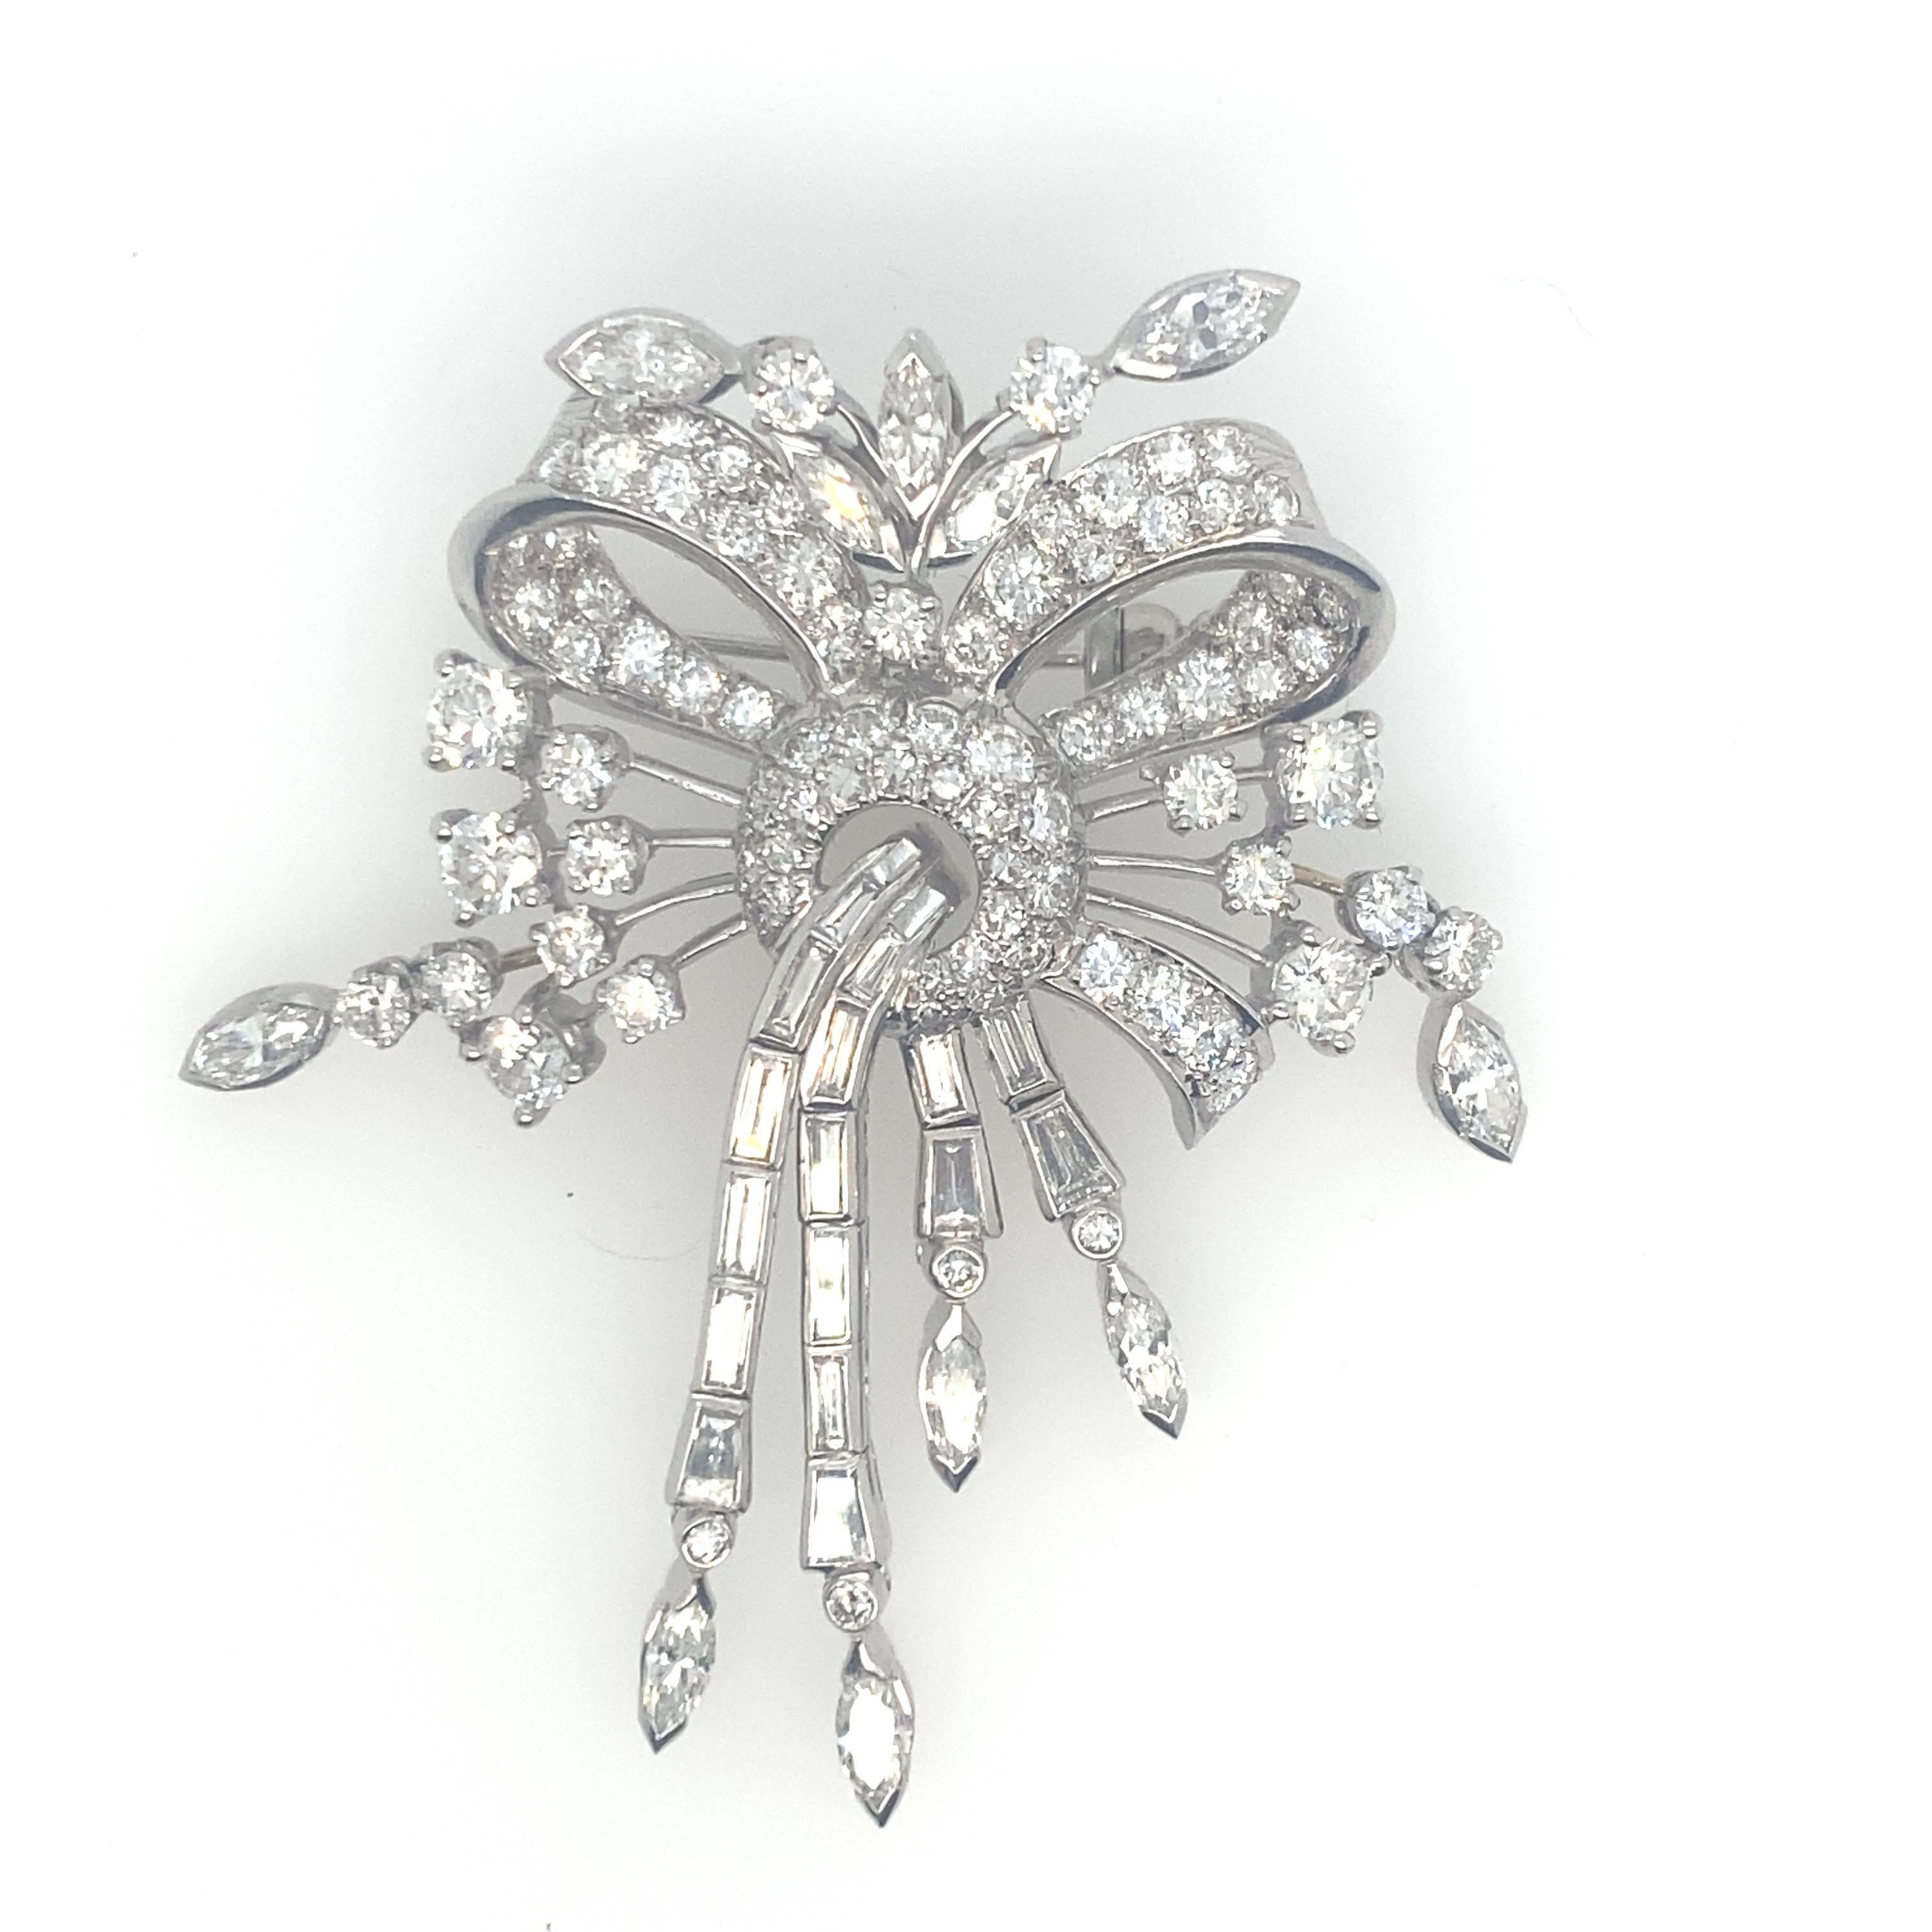 Povenance:   This Pin is  from the Estate of Alfred W. Miles, New York.  He was the chairman of the Hoving Corporation, and on the board of Directors for Tiffany and Company. Mr. Miles was also Senior Vice President of Bonwit Teller, Fifth Avenue